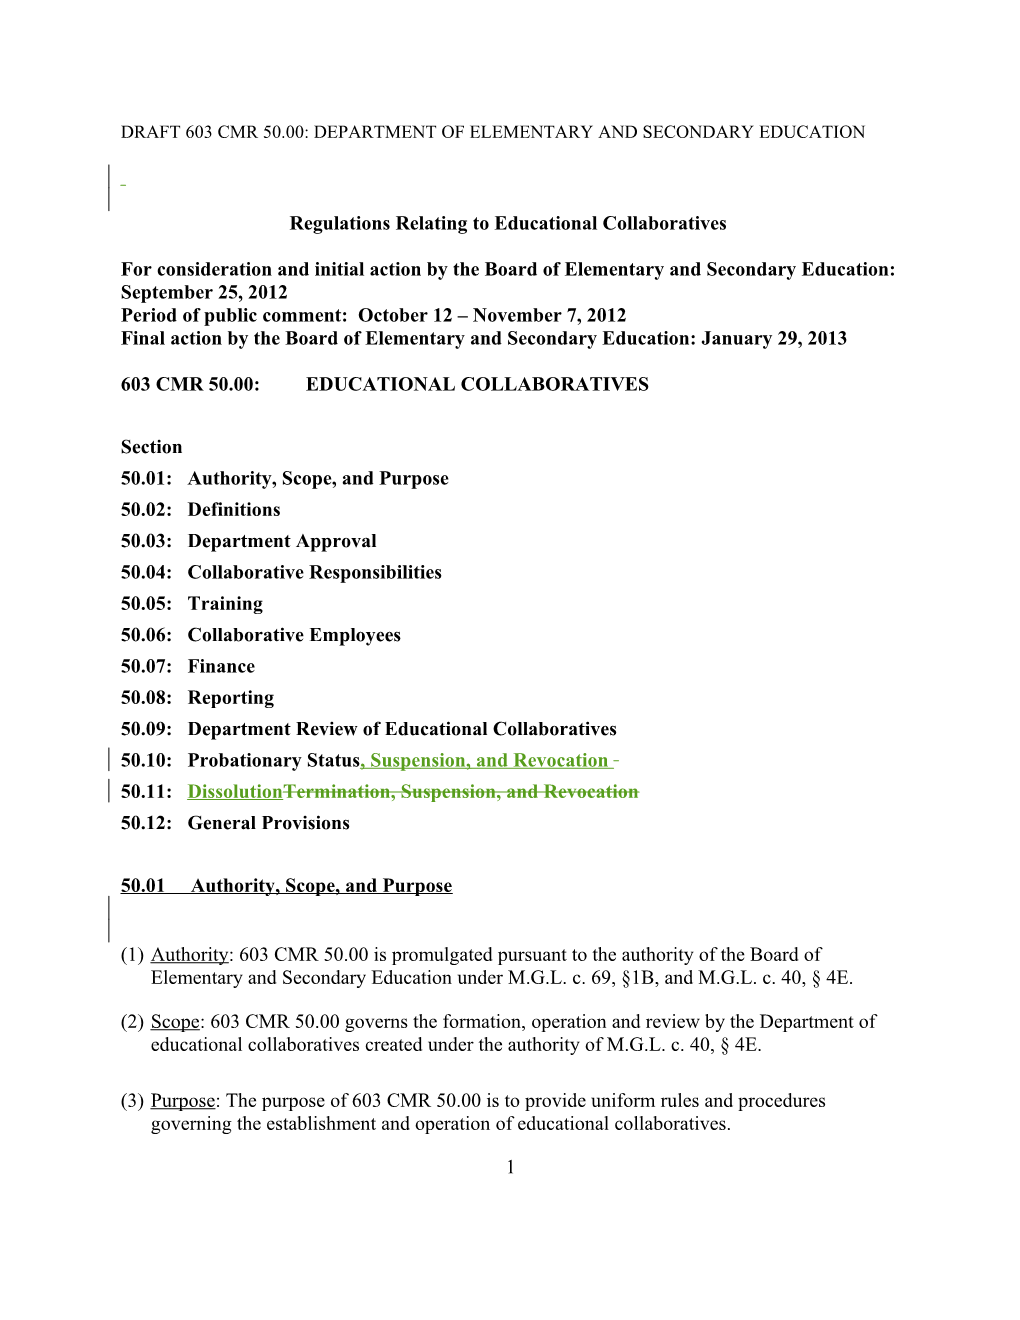 Board Memorandum Attachment, Educational Collaboritives Regulations Tracked Changes, January